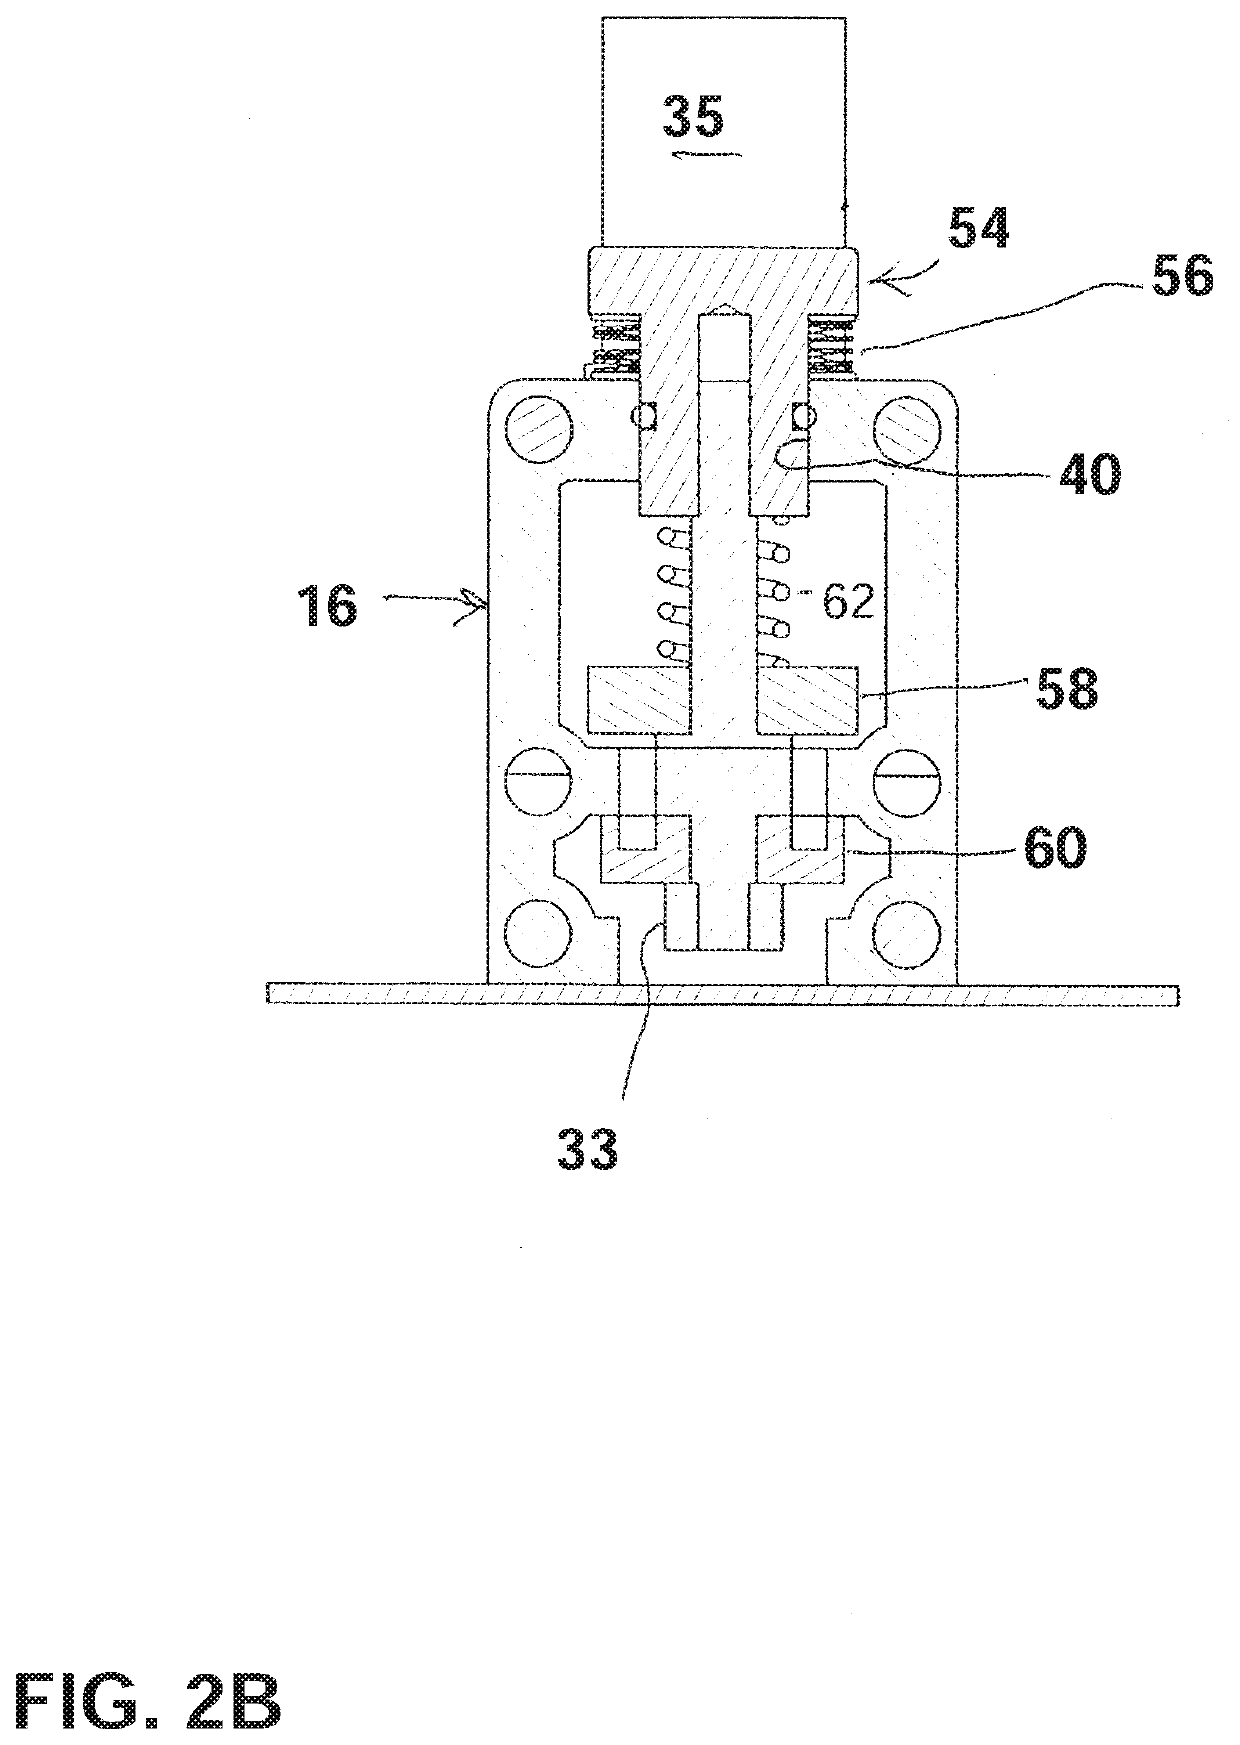 Vaporizer apparatus having both a vacuum pump and a heating element, and method of using same